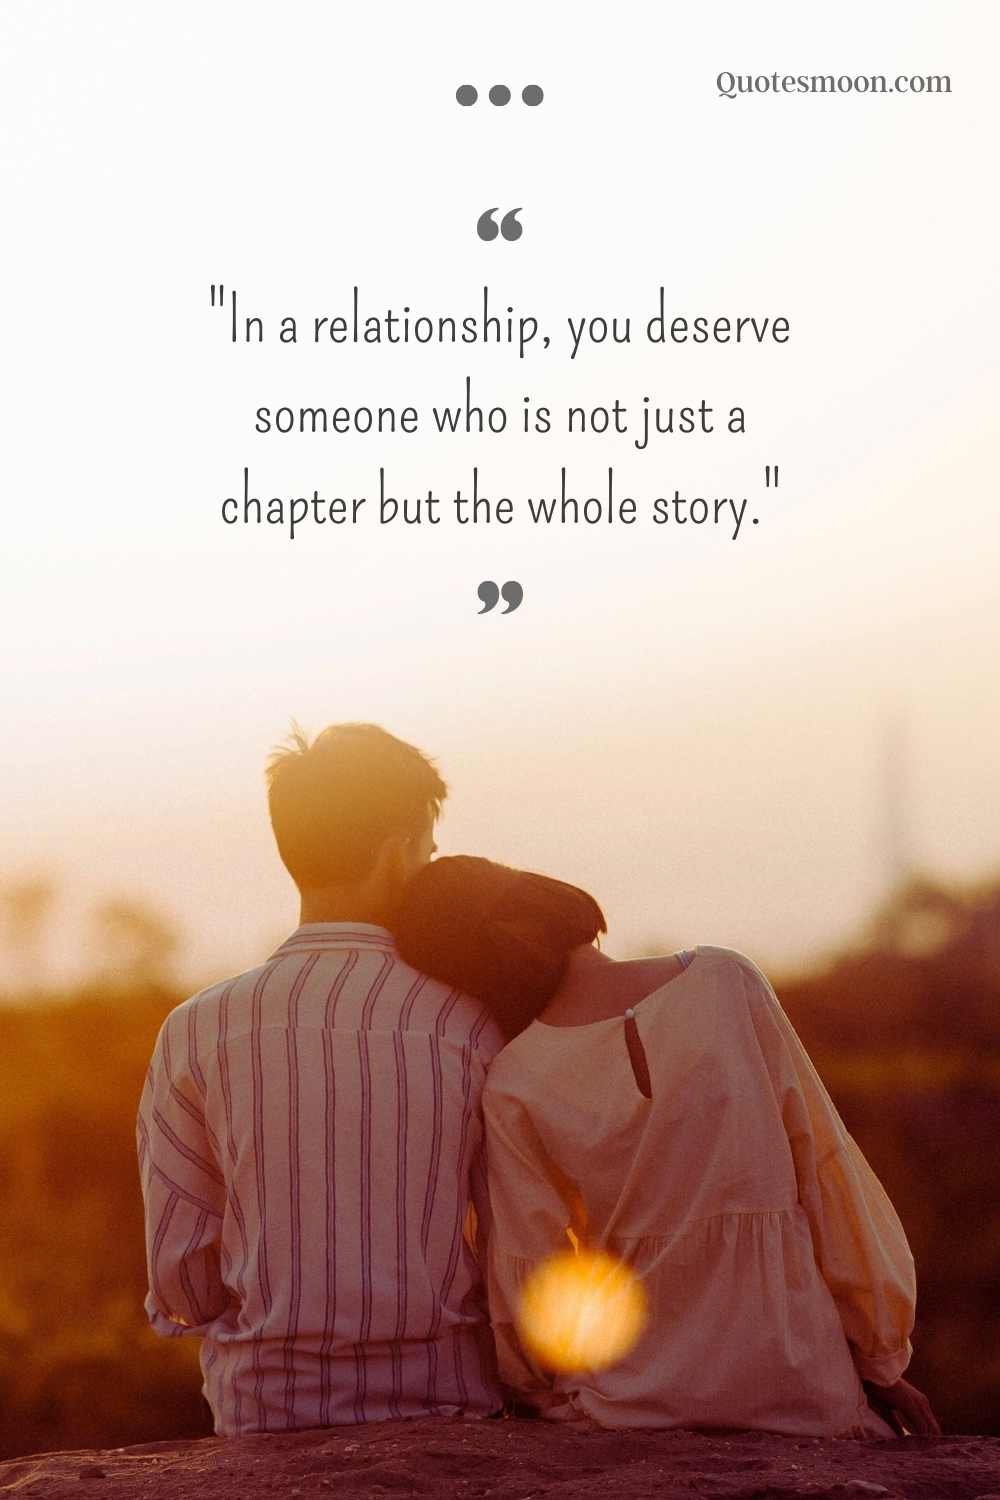 relationship you deserve better quotes